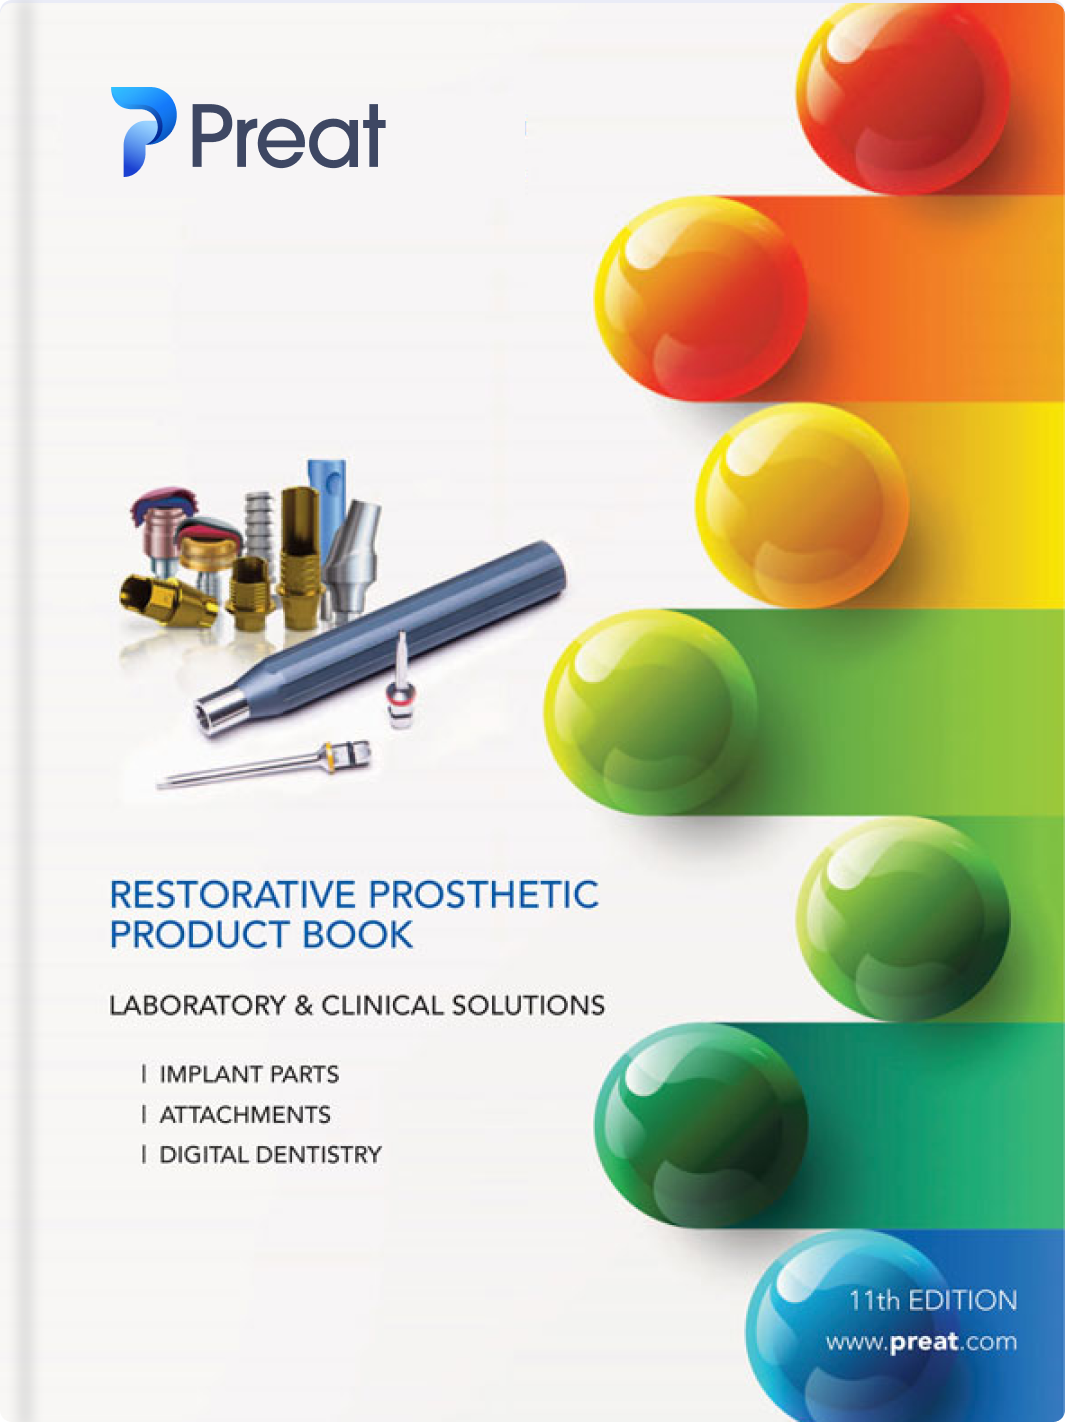 Preat Prosthetic Product Book